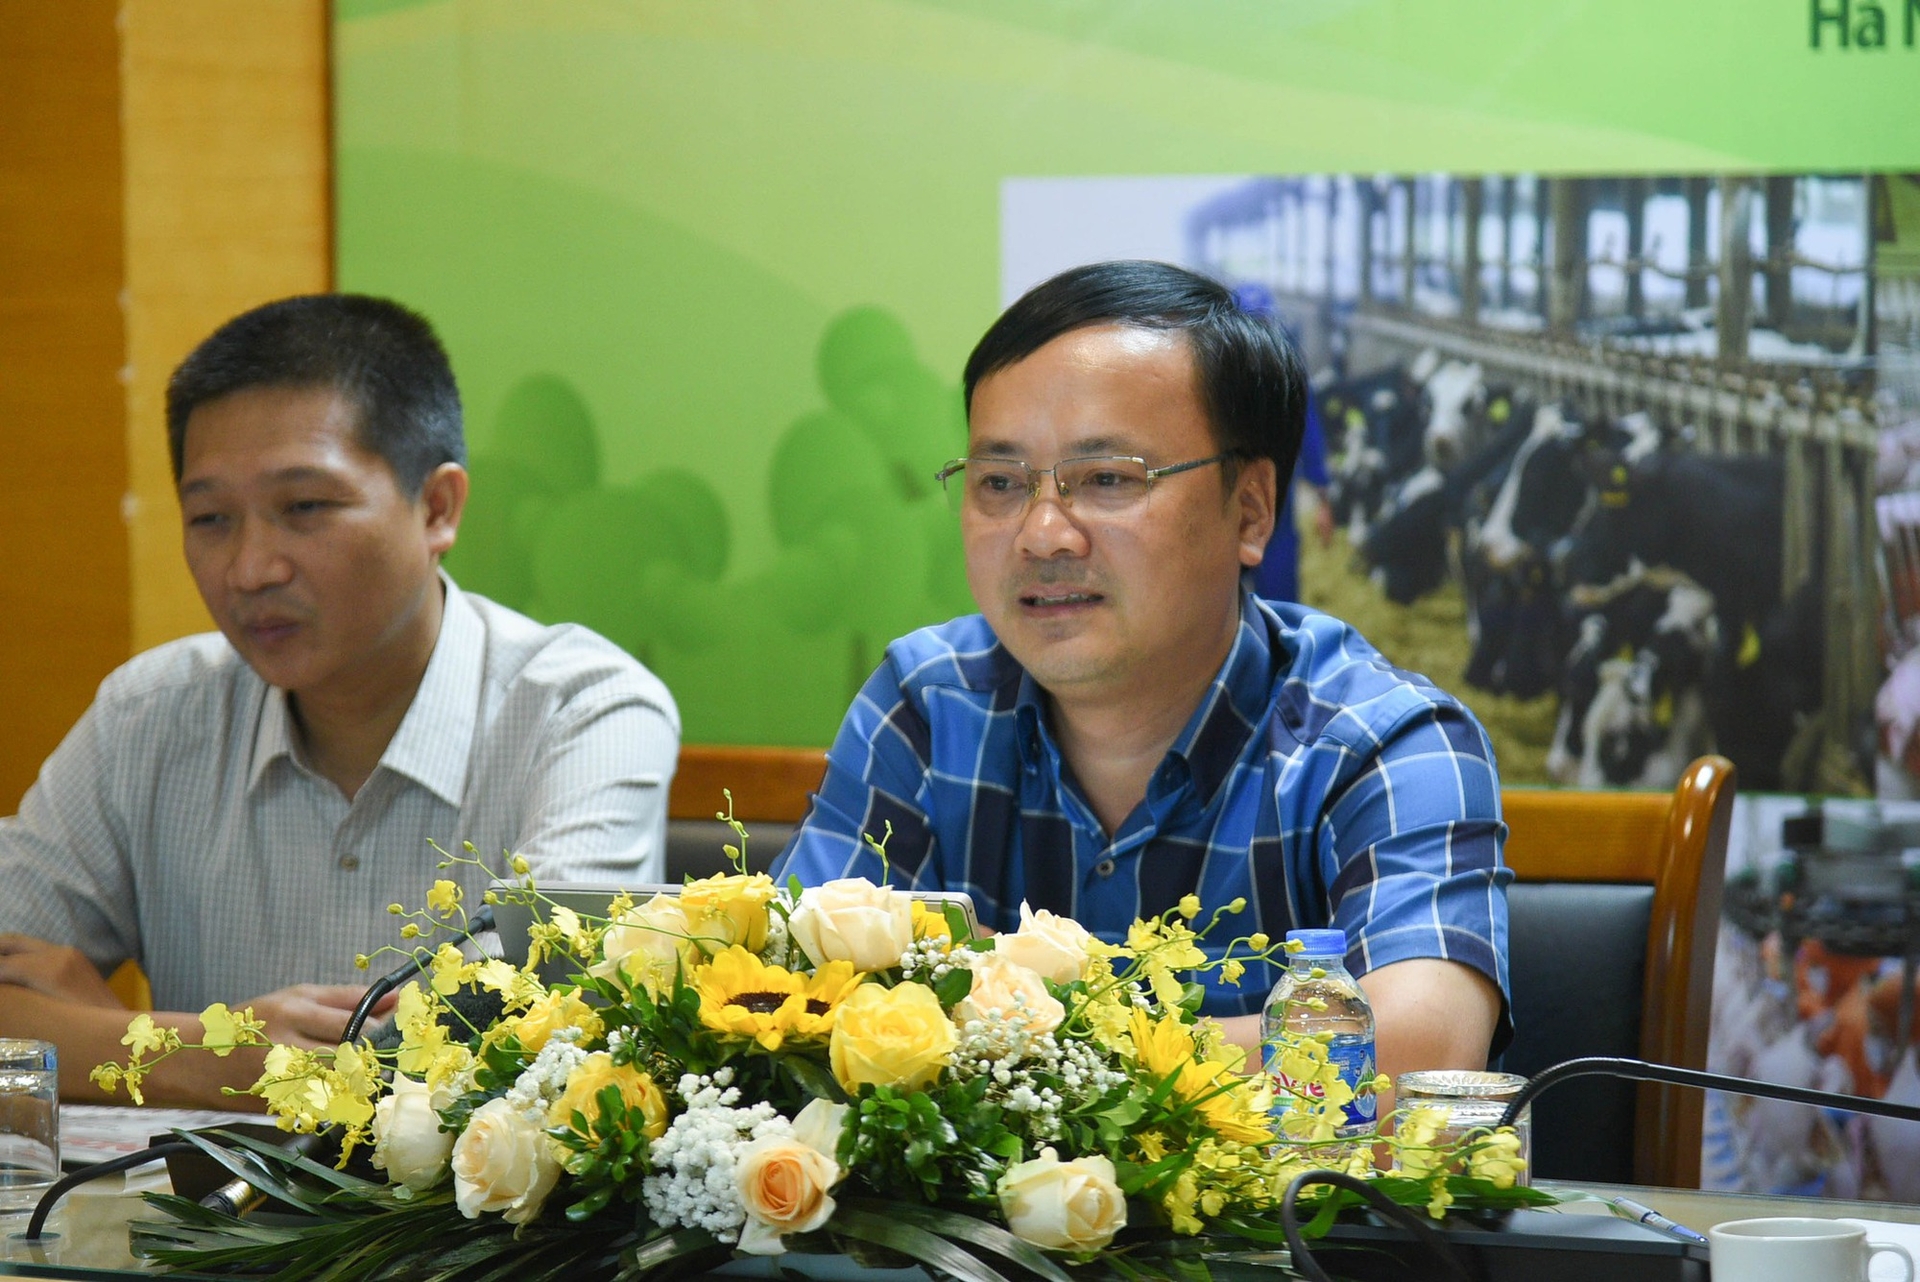 Phan Quang Minh, Deputy Director of the Department of Animal Health (Ministry of Agriculture and Rural Development), informed that there are more than 2,400 facilities and farming areas in 57 provinces and cities across the country certified as disease-free. Photo: TQ.